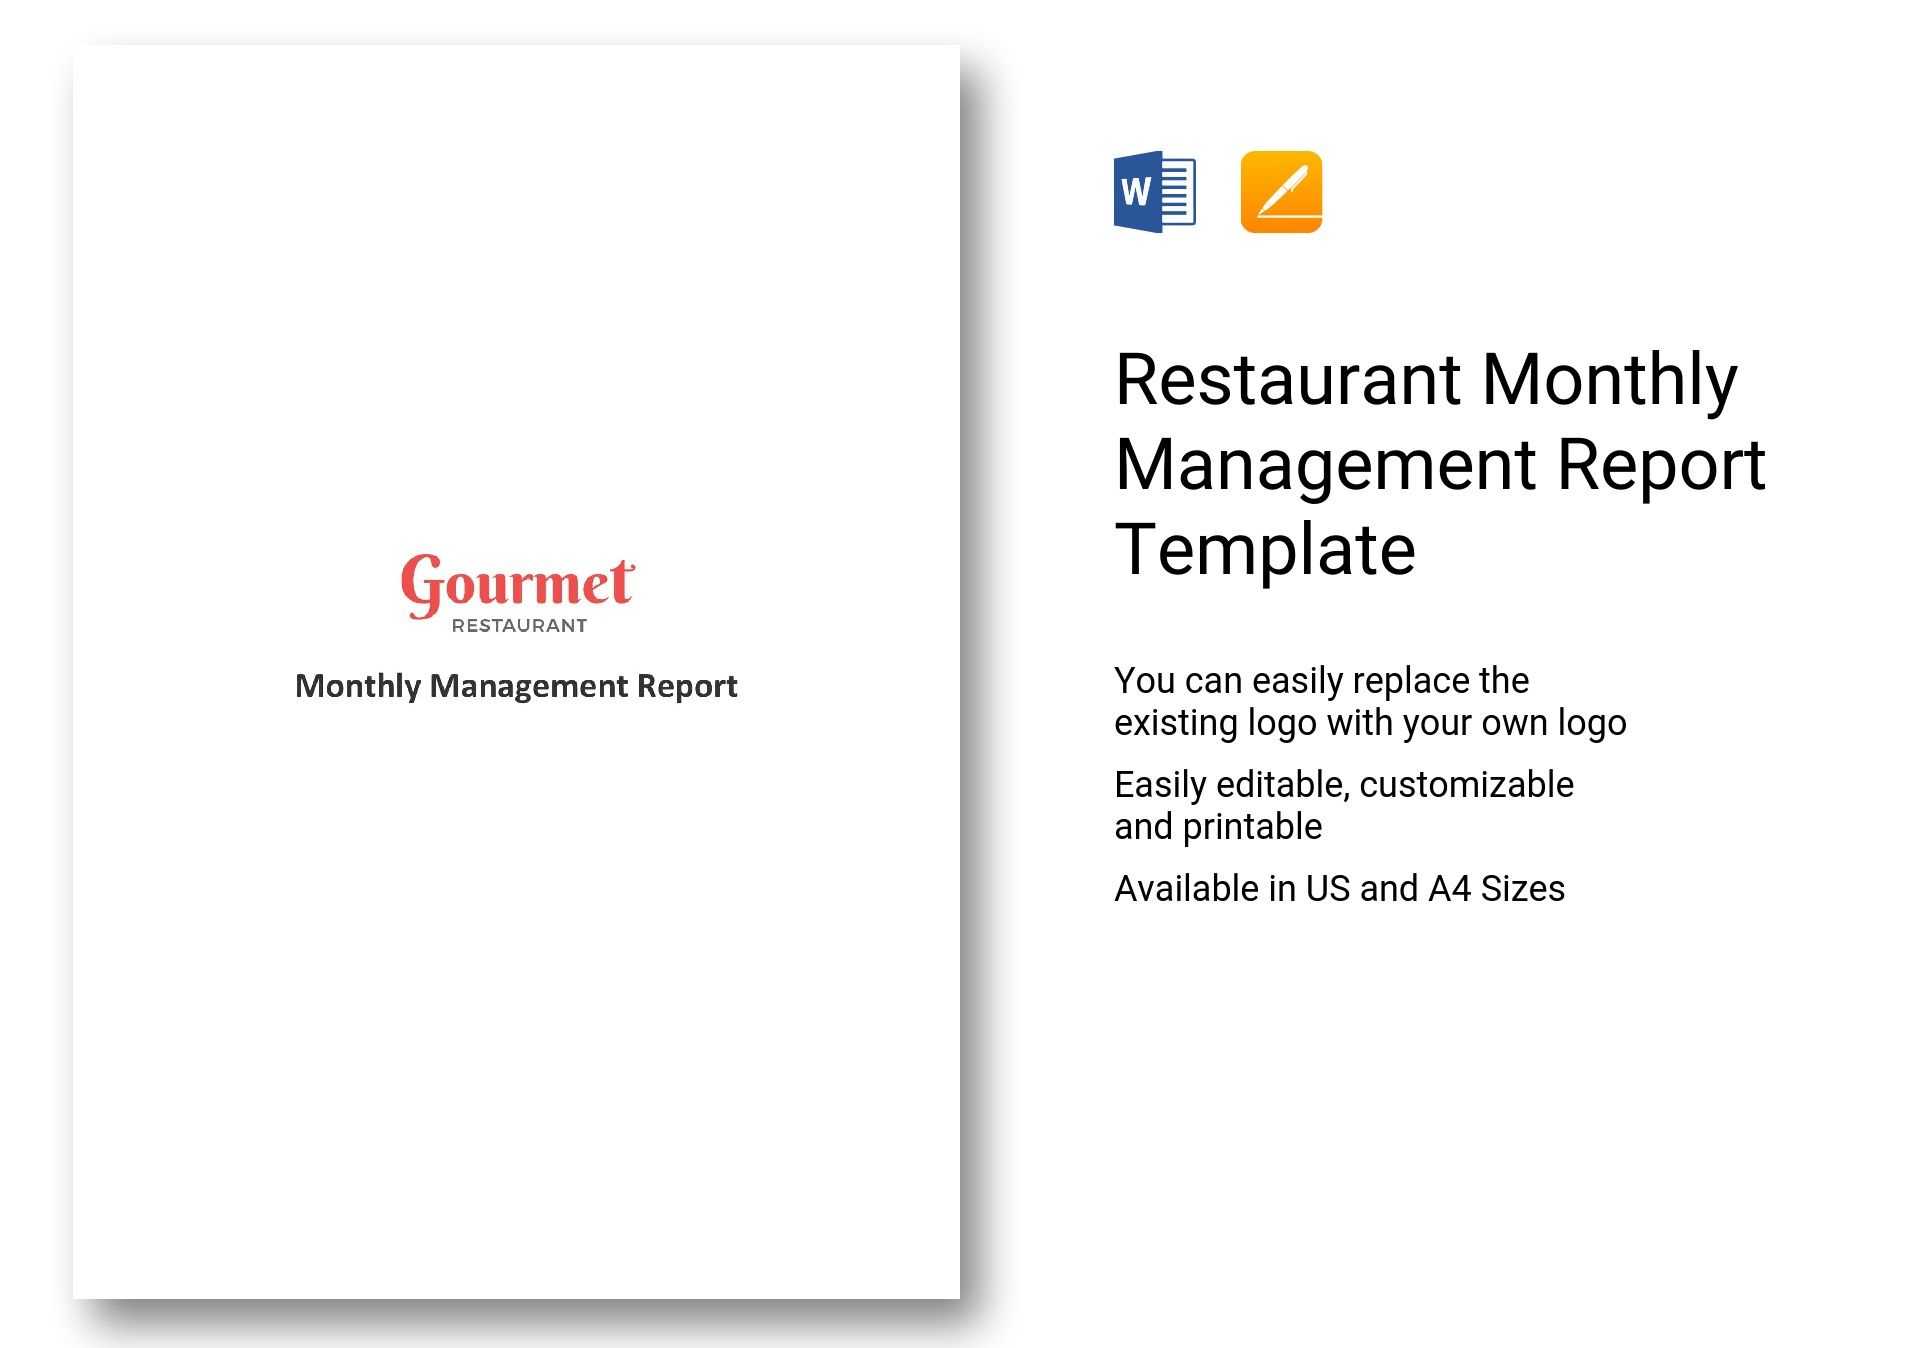 Restaurant Monthly Management Report Template In Word, Apple For It Management Report Template